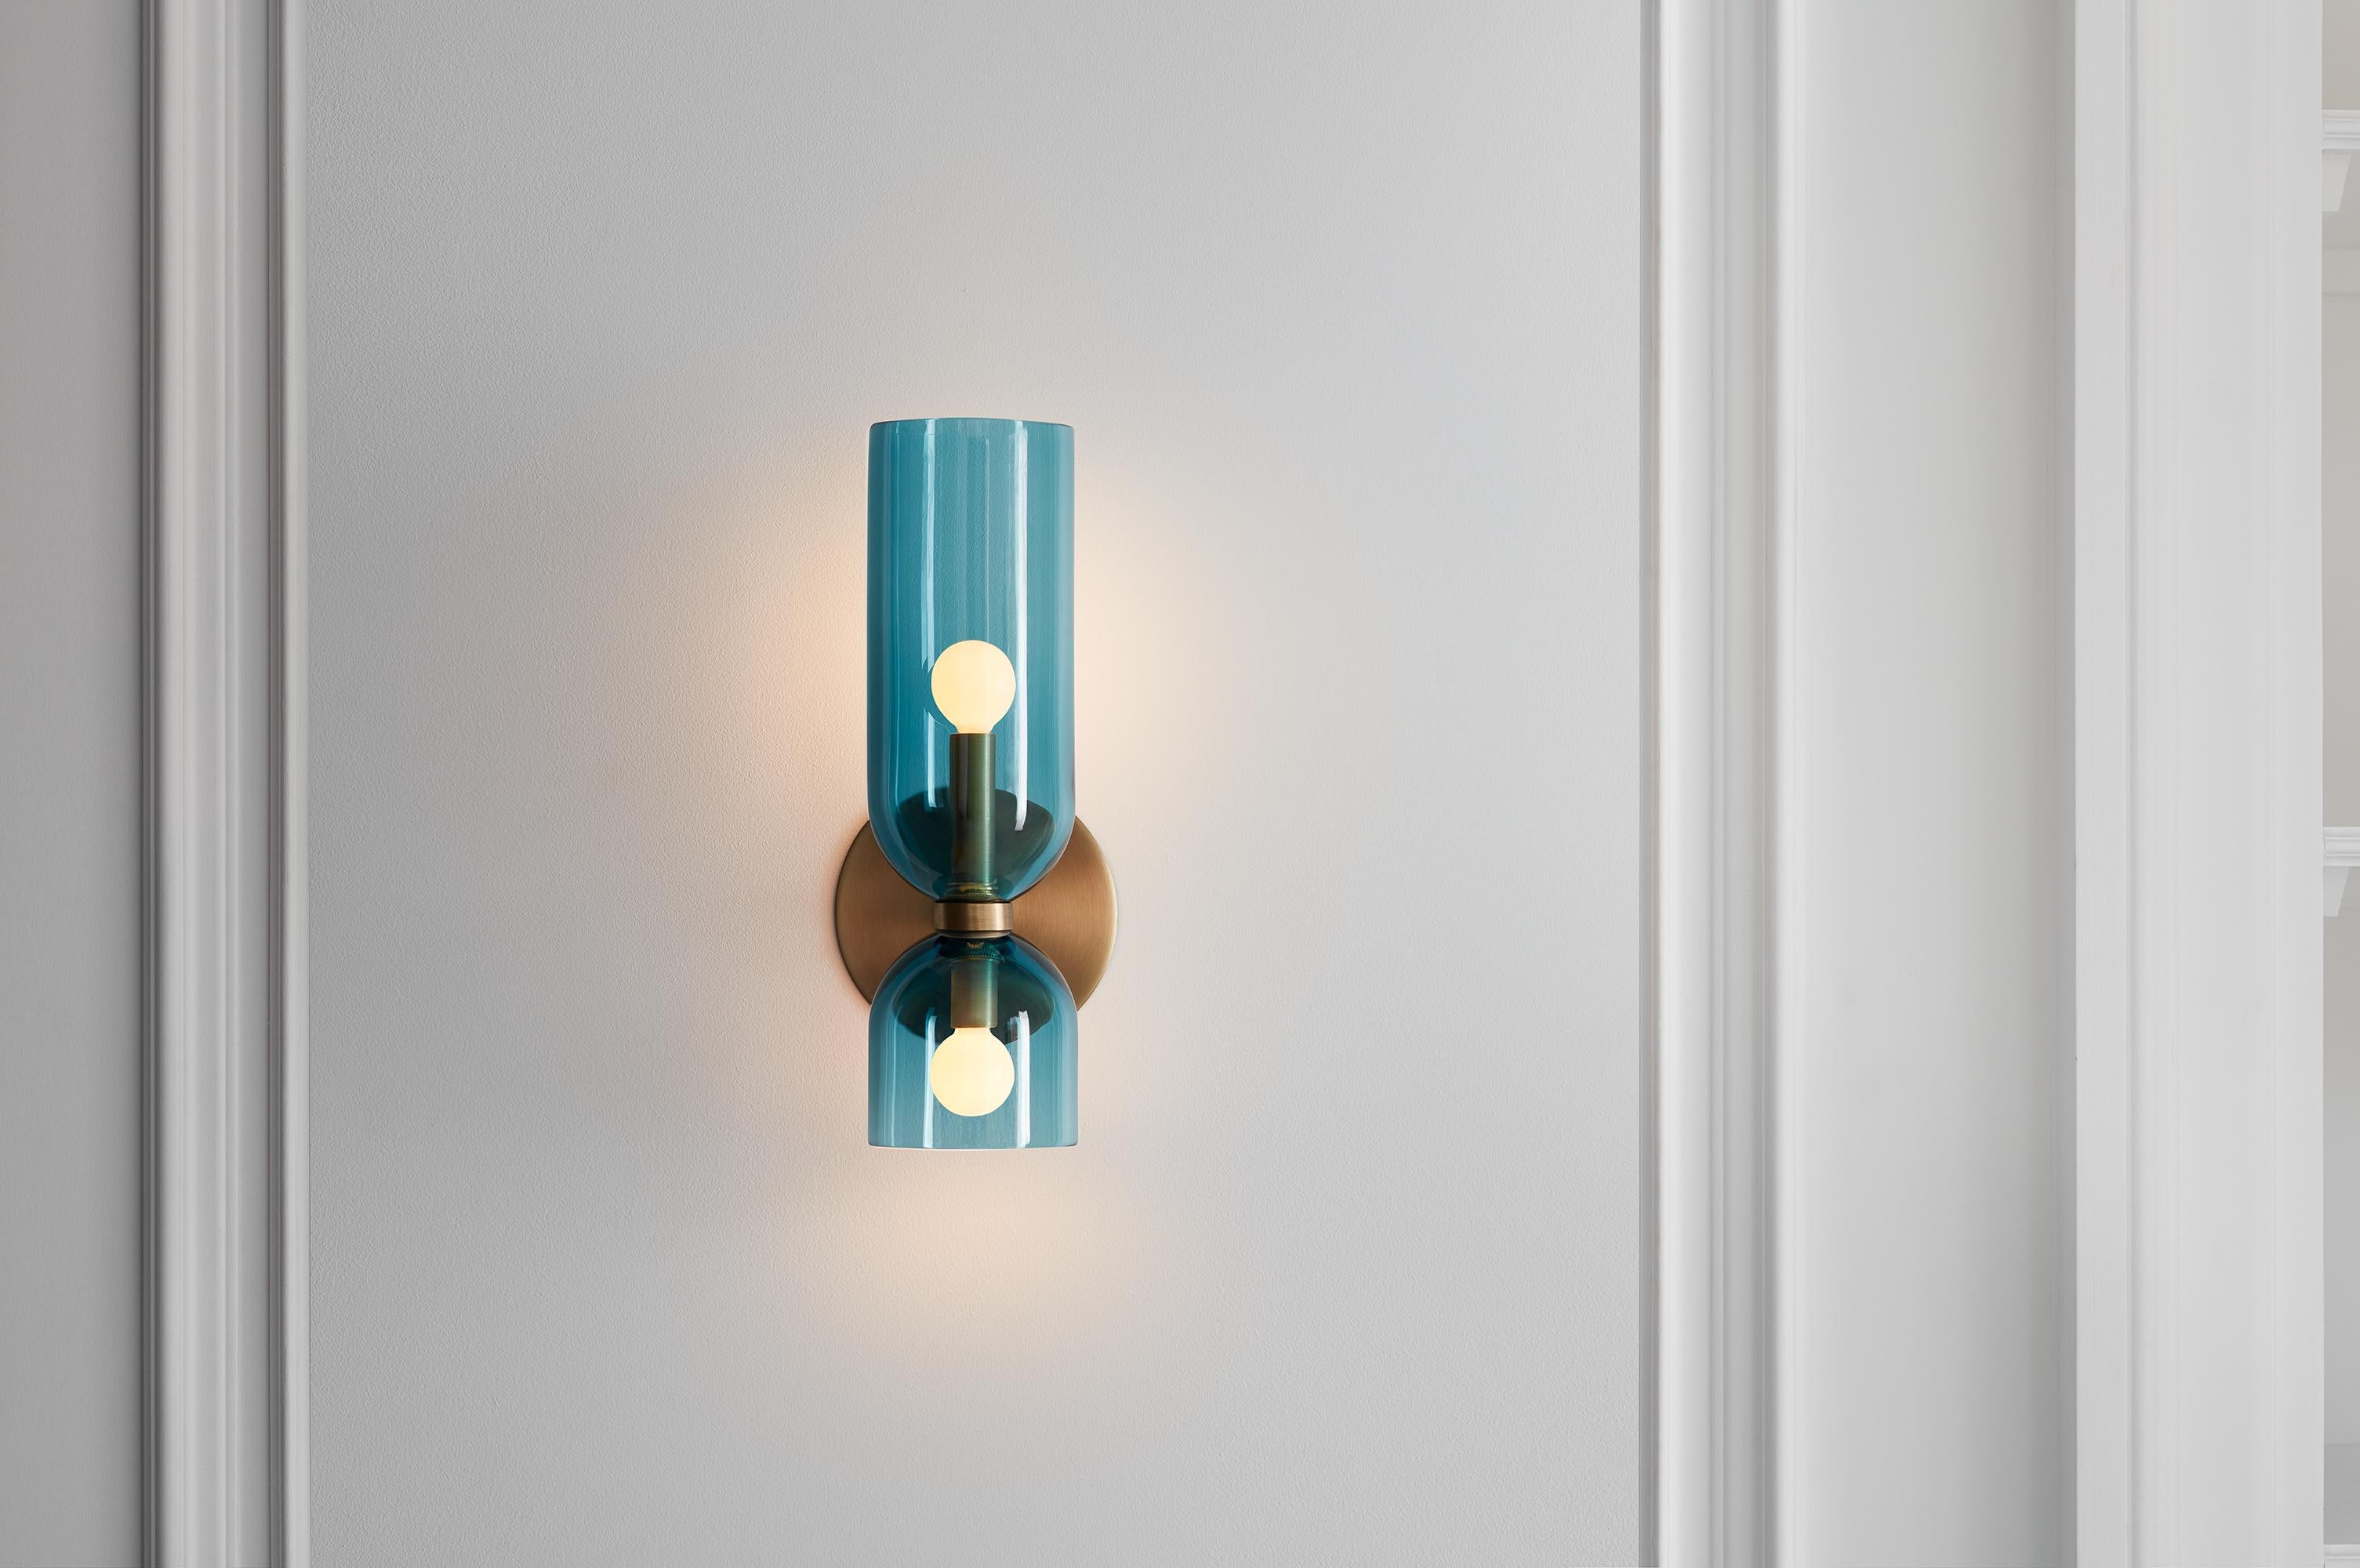 Edie explores the relationship between two similar forms. An exaggerated top column plays against the sconce’s overall sense of quiet restraint.

While Edie evokes a certain feeling of timelessness, it retains a fresh and modern presence.

Opal